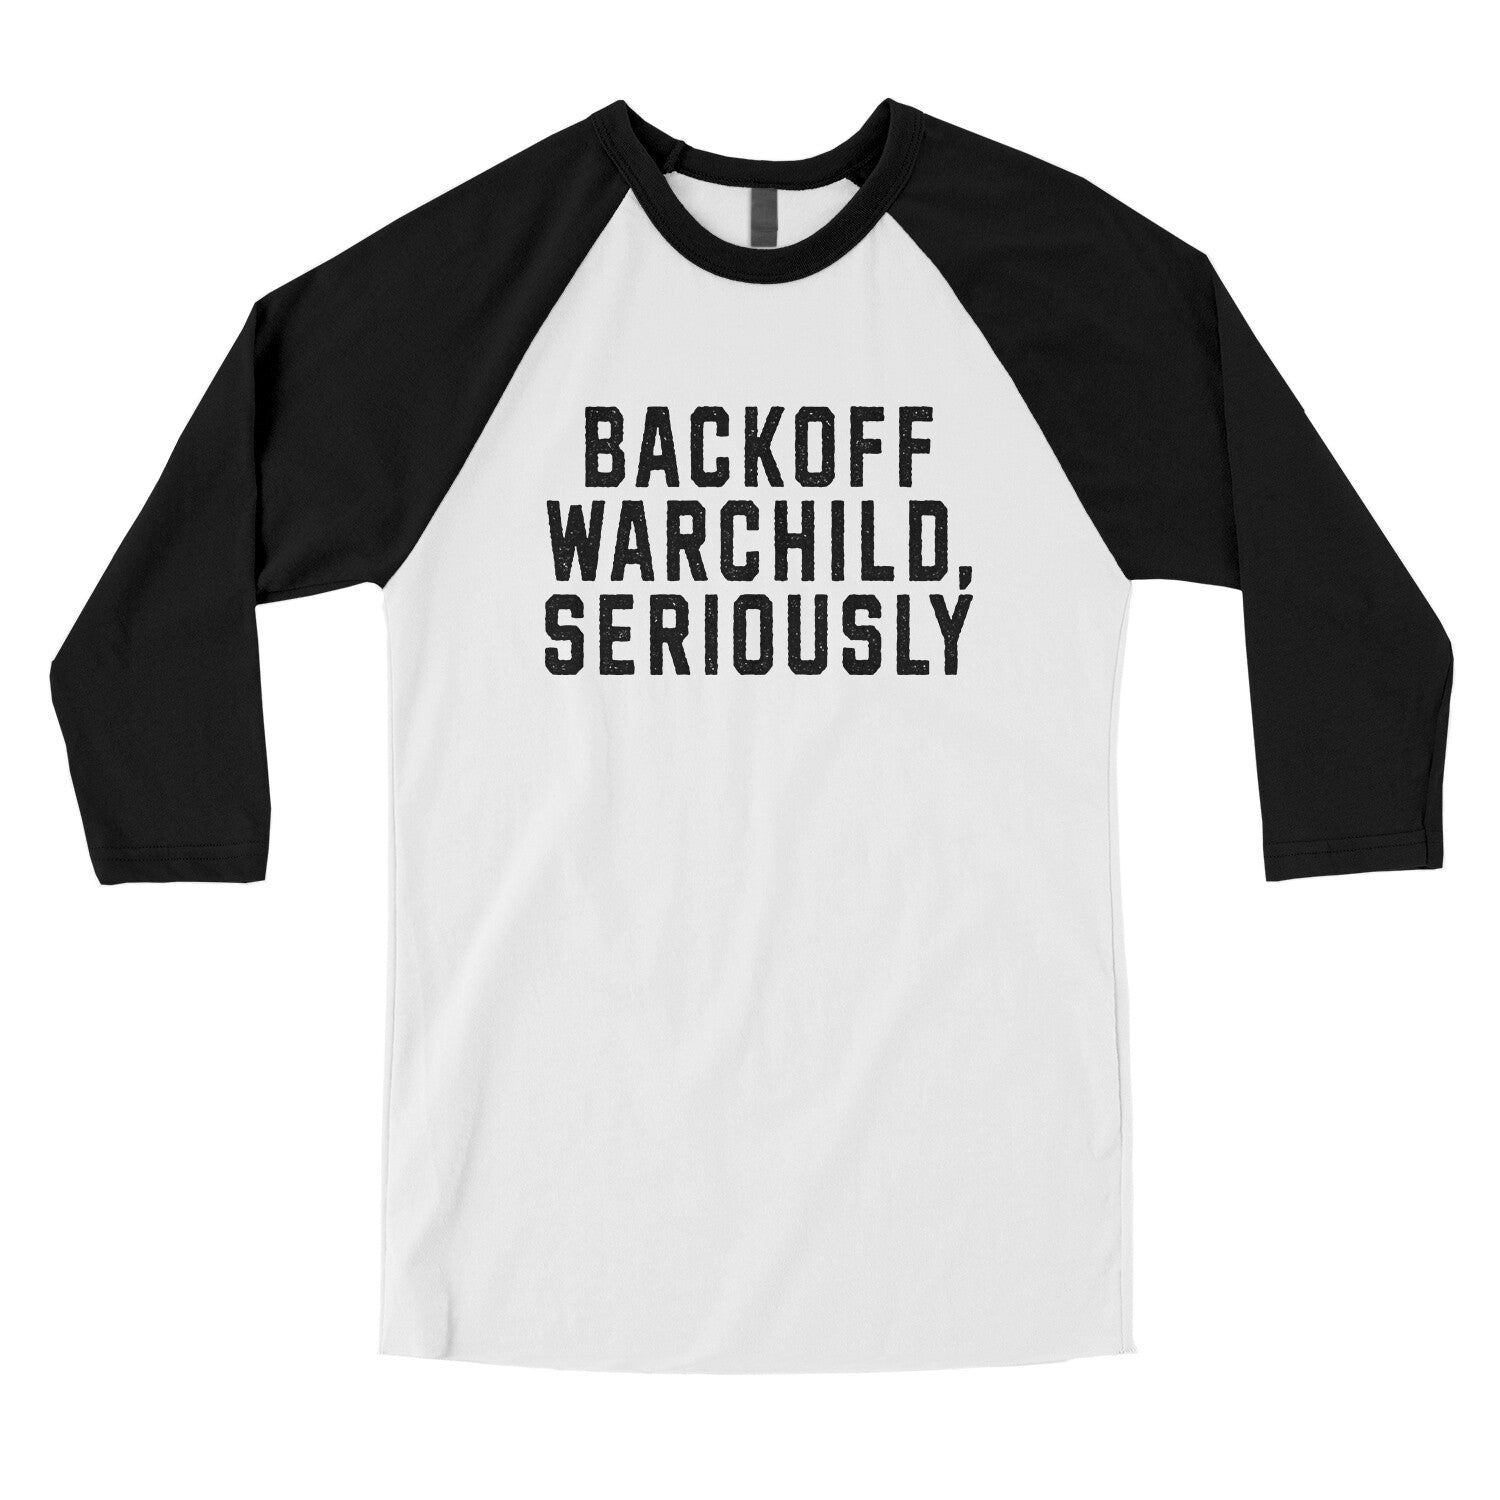 Backoff Warchild Seriously in White with Black Color